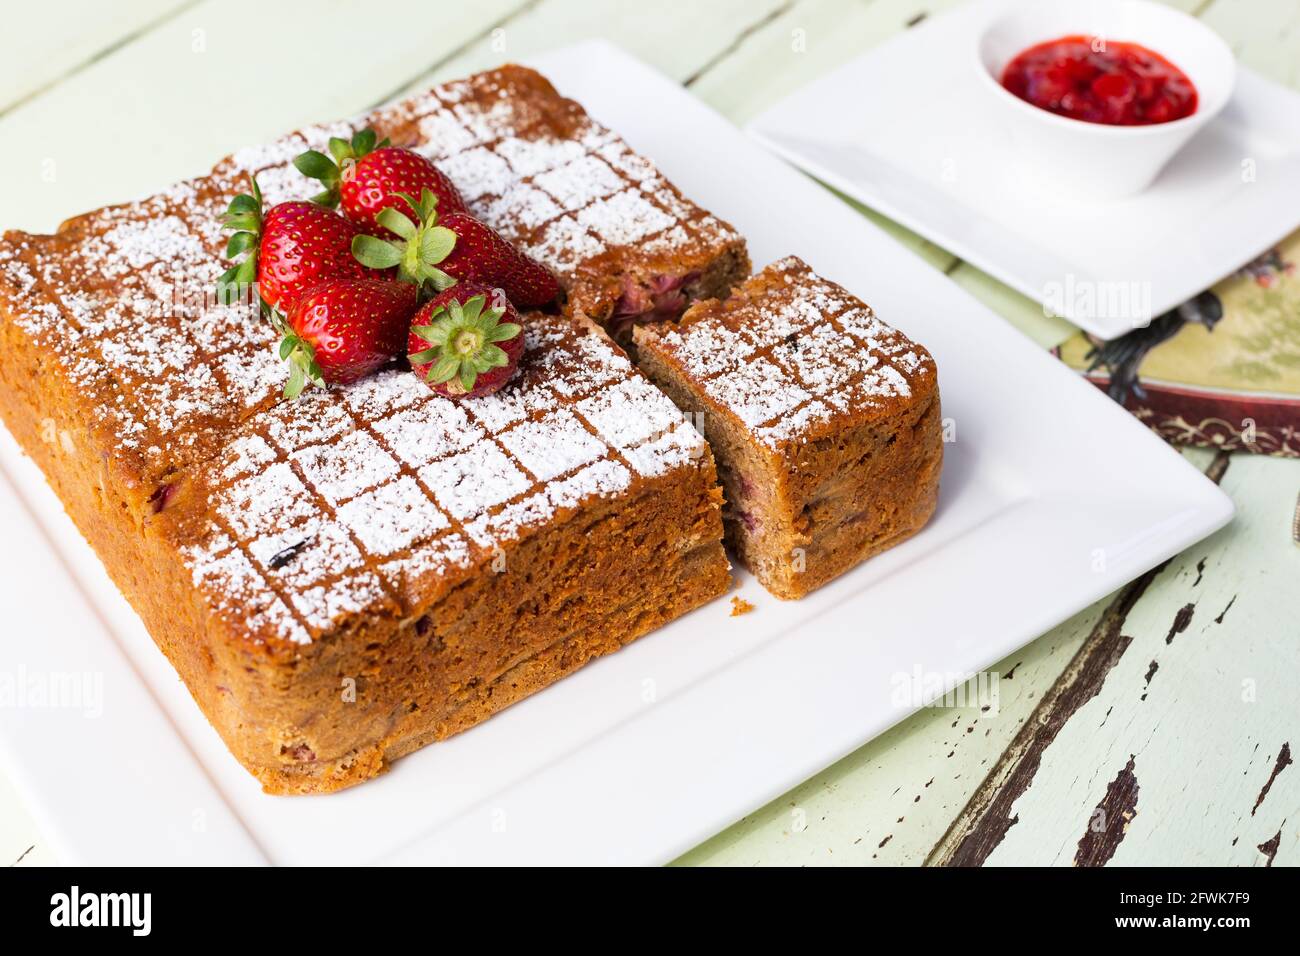 Square cake with cut slice on white plate with strawberries on top and couli on the side Stock Photo